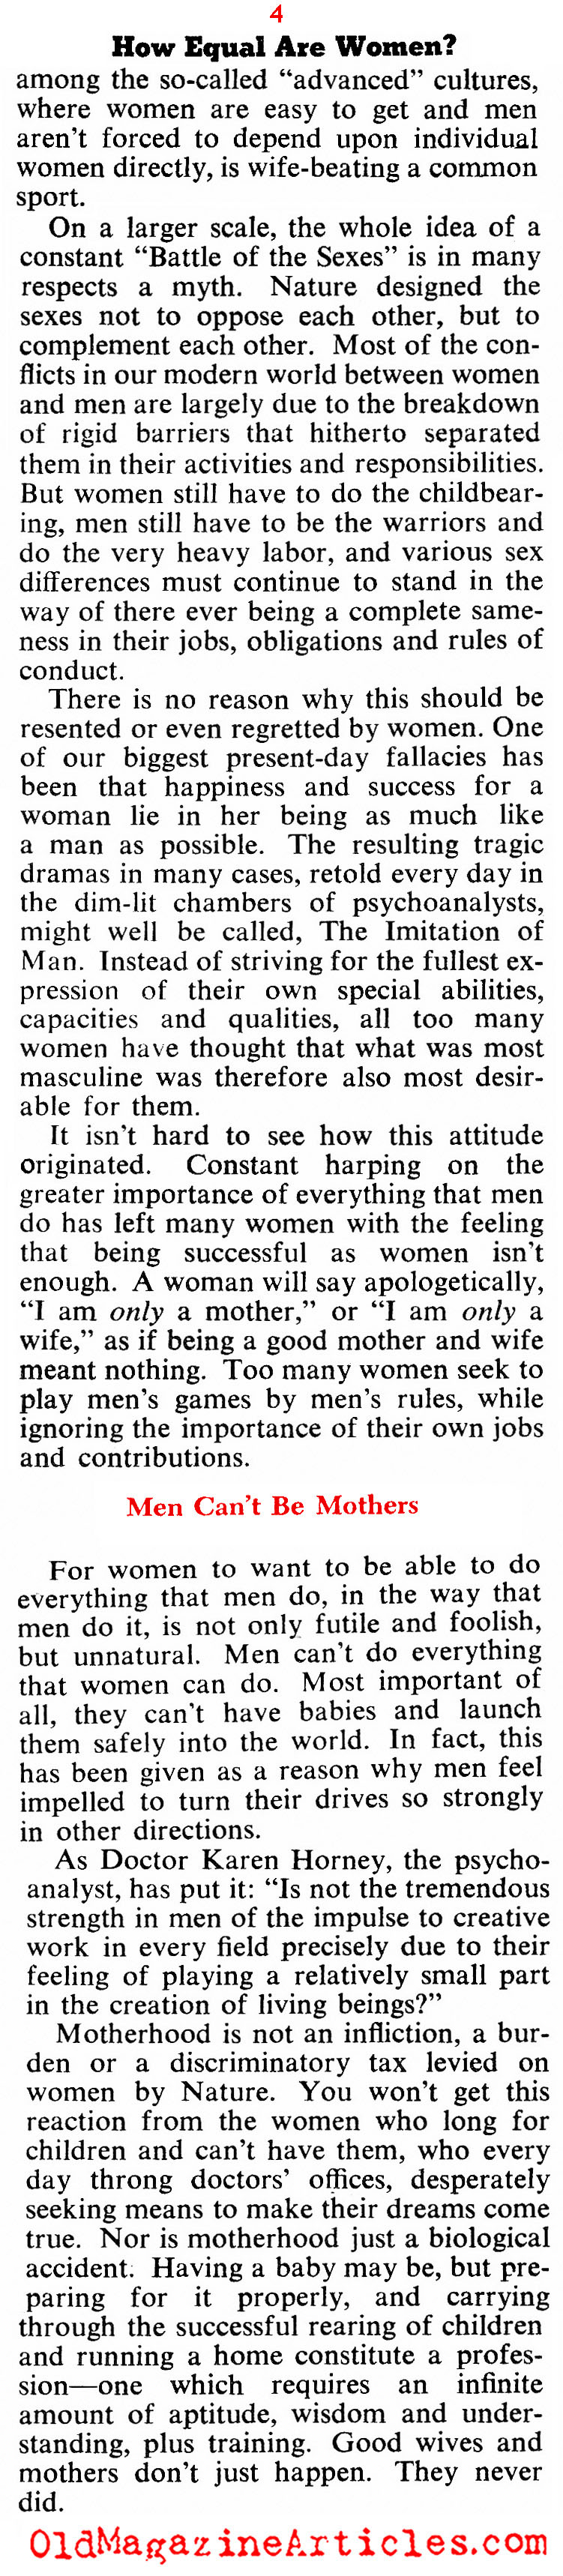 Home Front Feminism (Collier's Magazine, 1943)